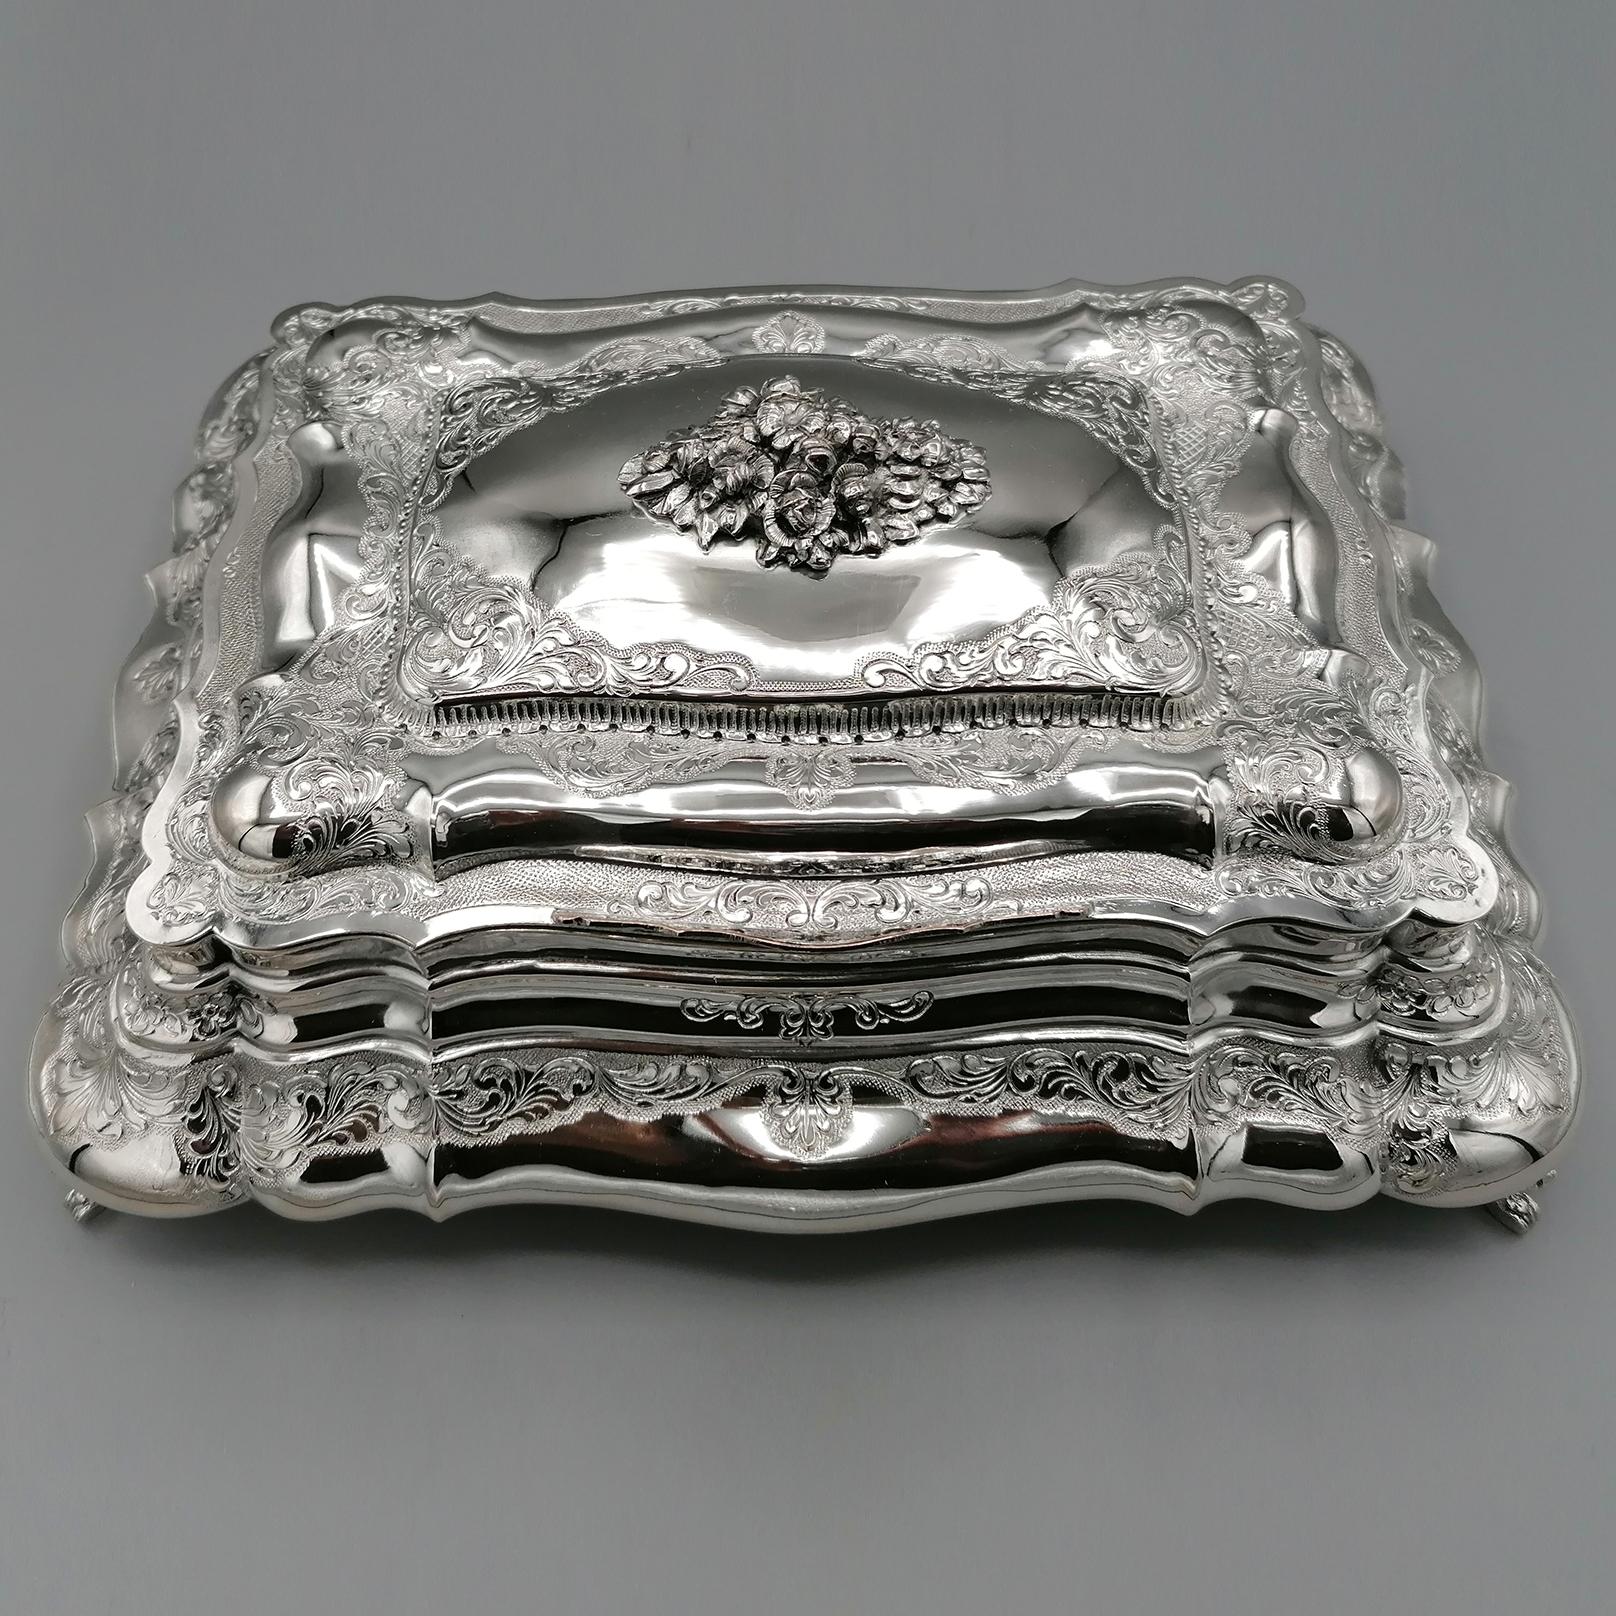 19th Century Italian Baroque Style Solid Silver Hand Made Jewellery Box Case For Sale 2